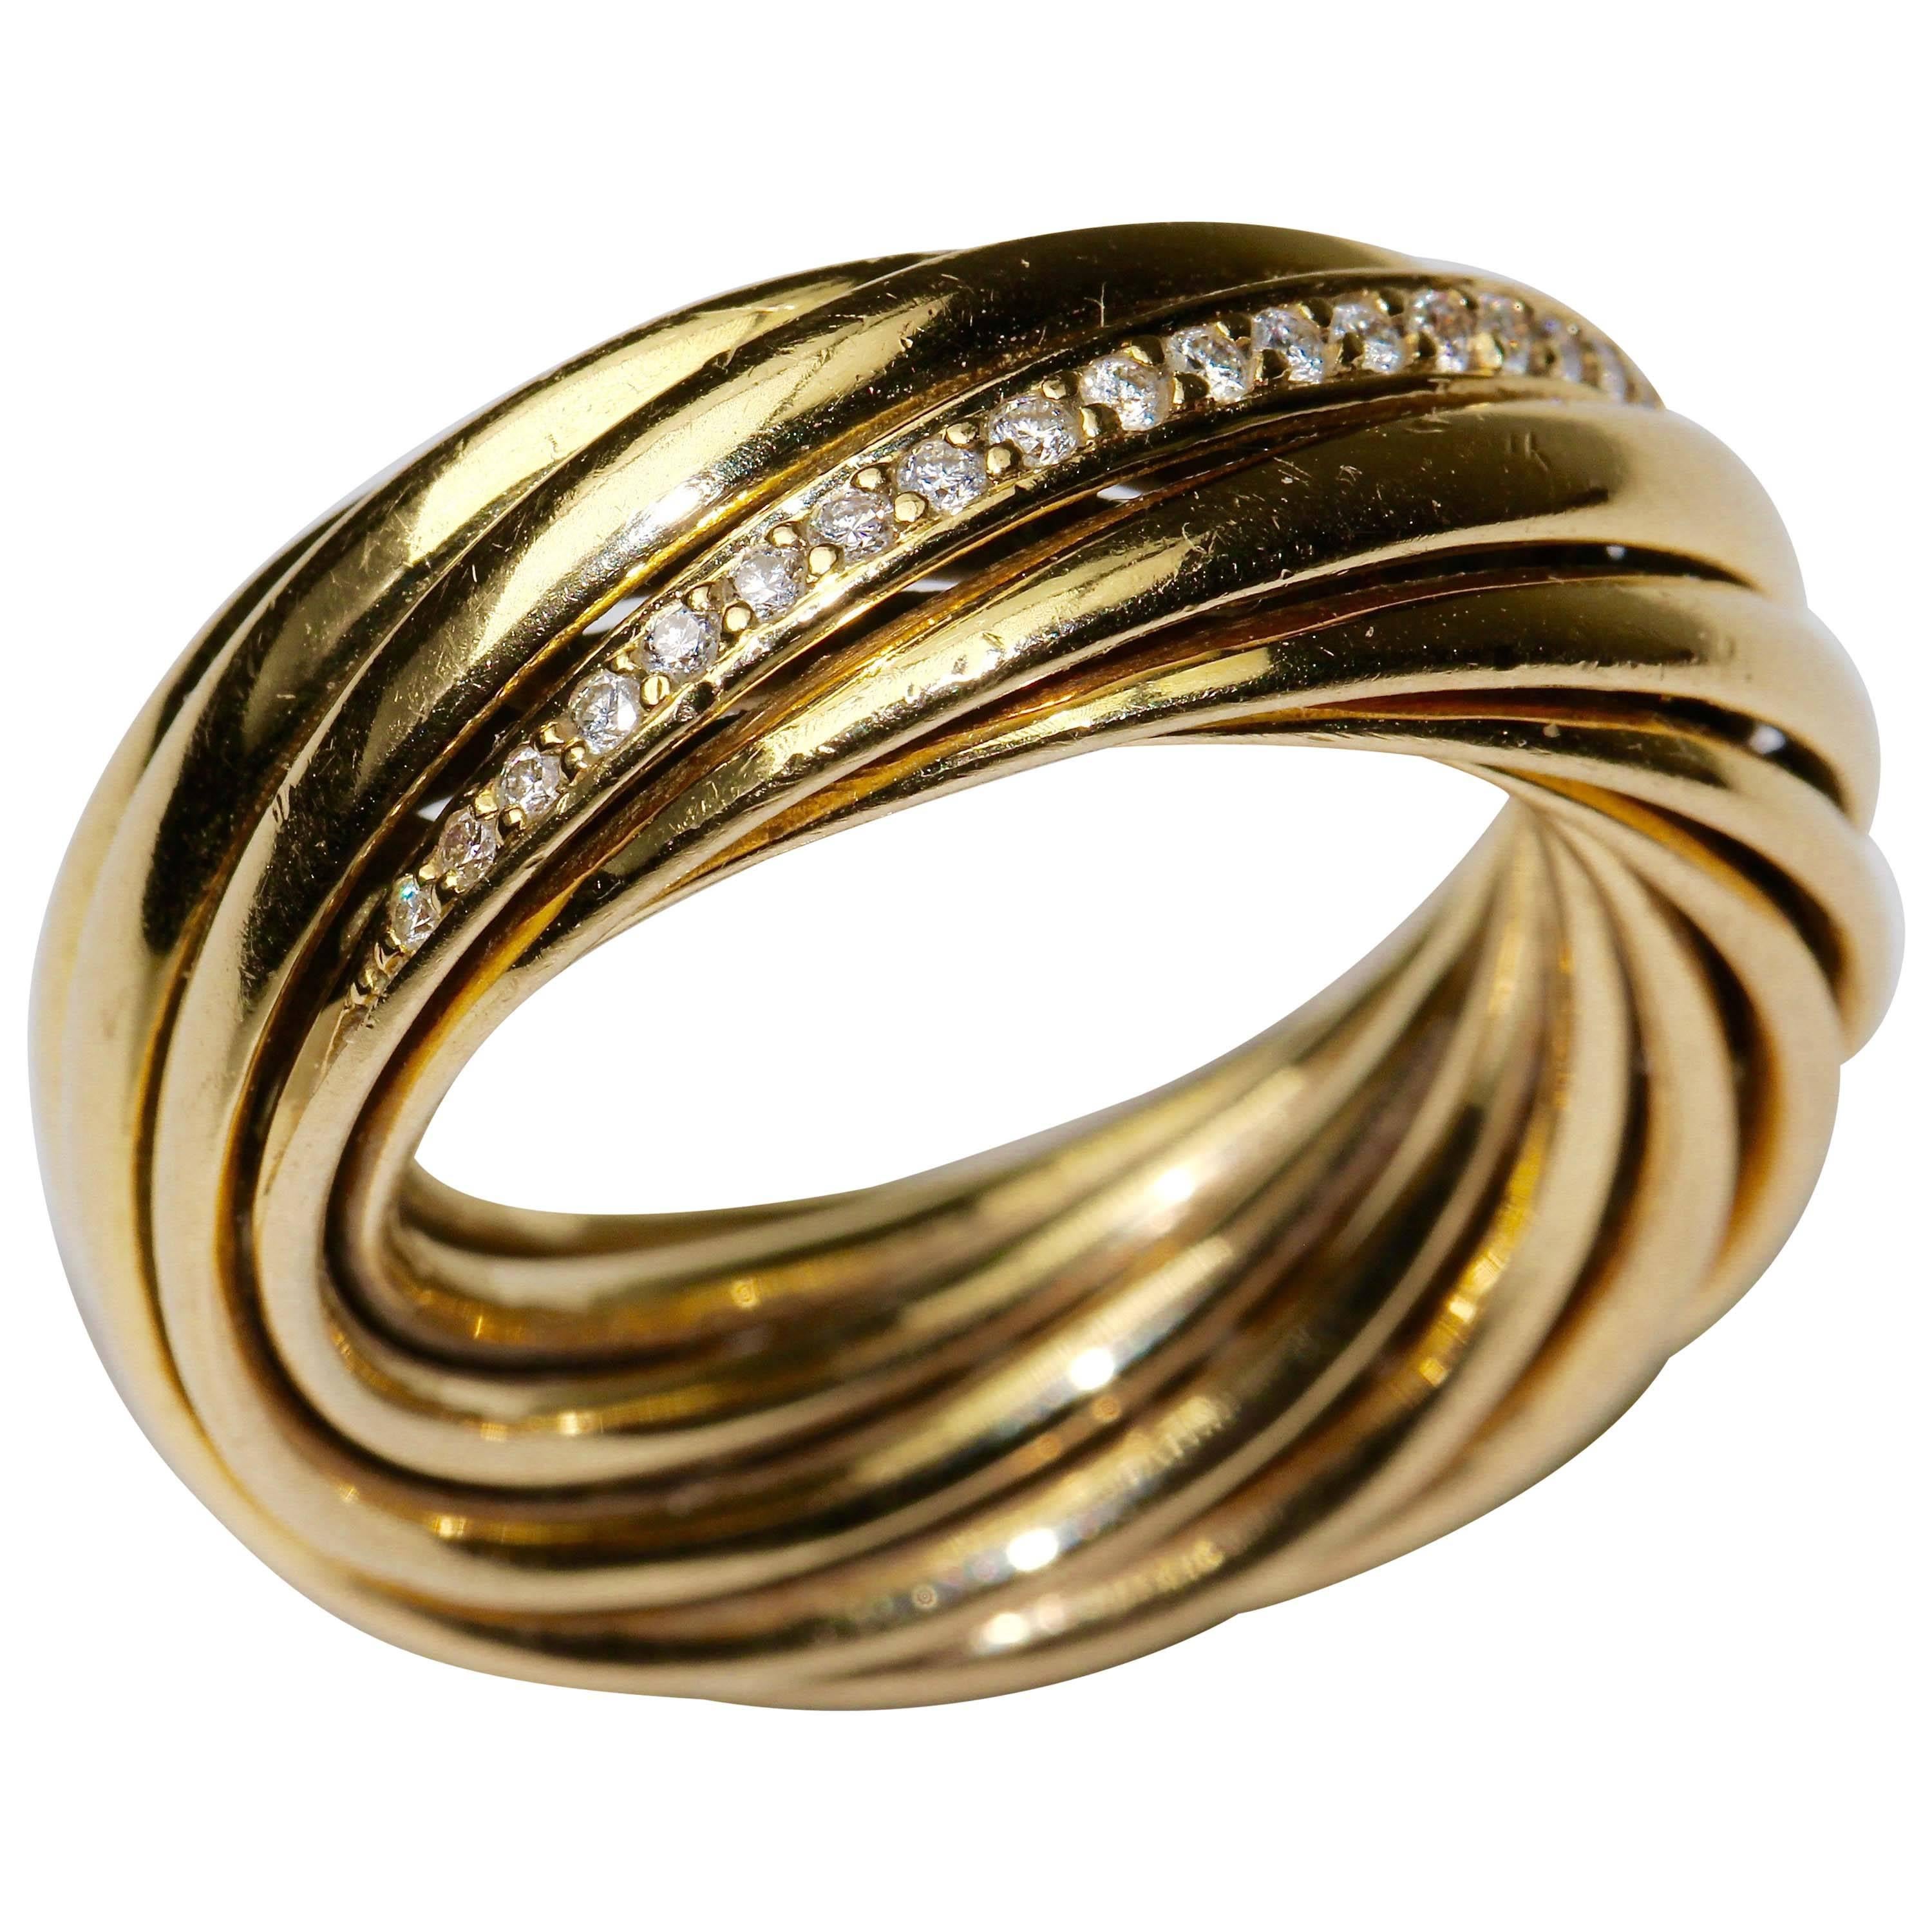 Braided 18K gold ring 'Helioro by Kim' WEMPE, set with 36 diamonds,